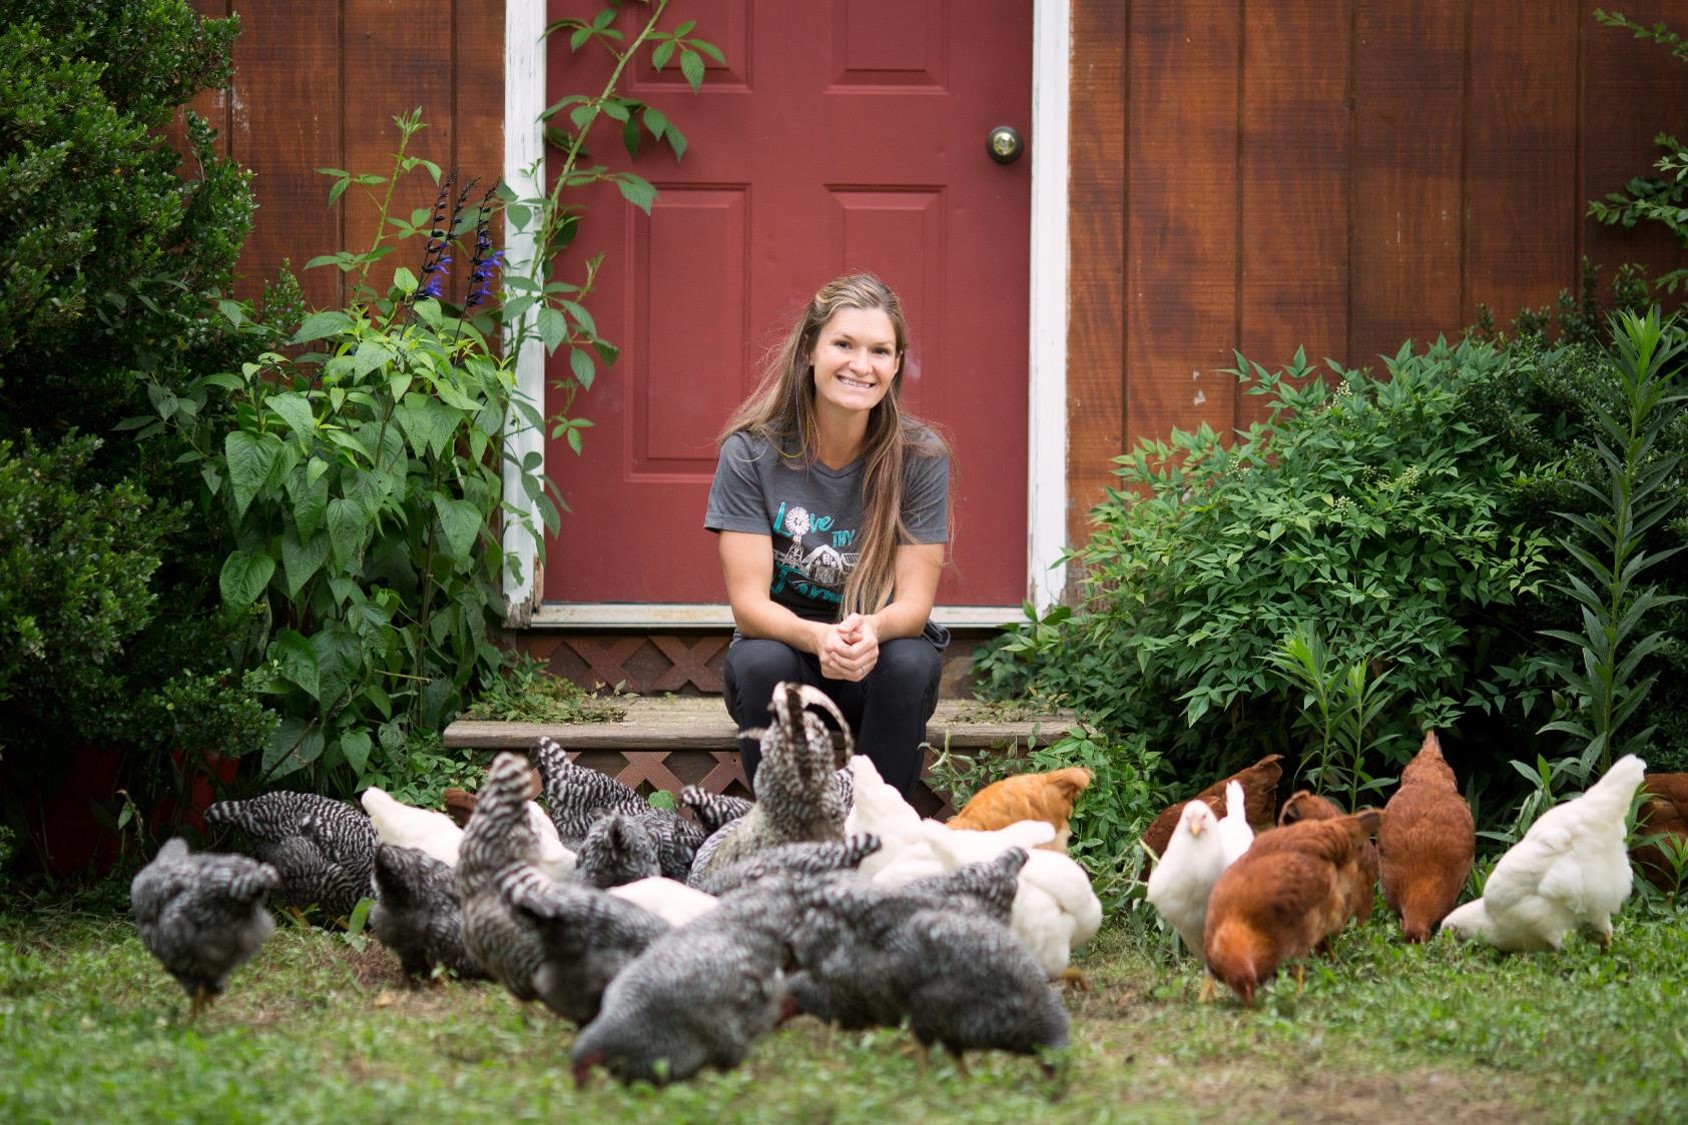 Ashley Grouch of The Farm Life Movement with chickens on her regenerative farm